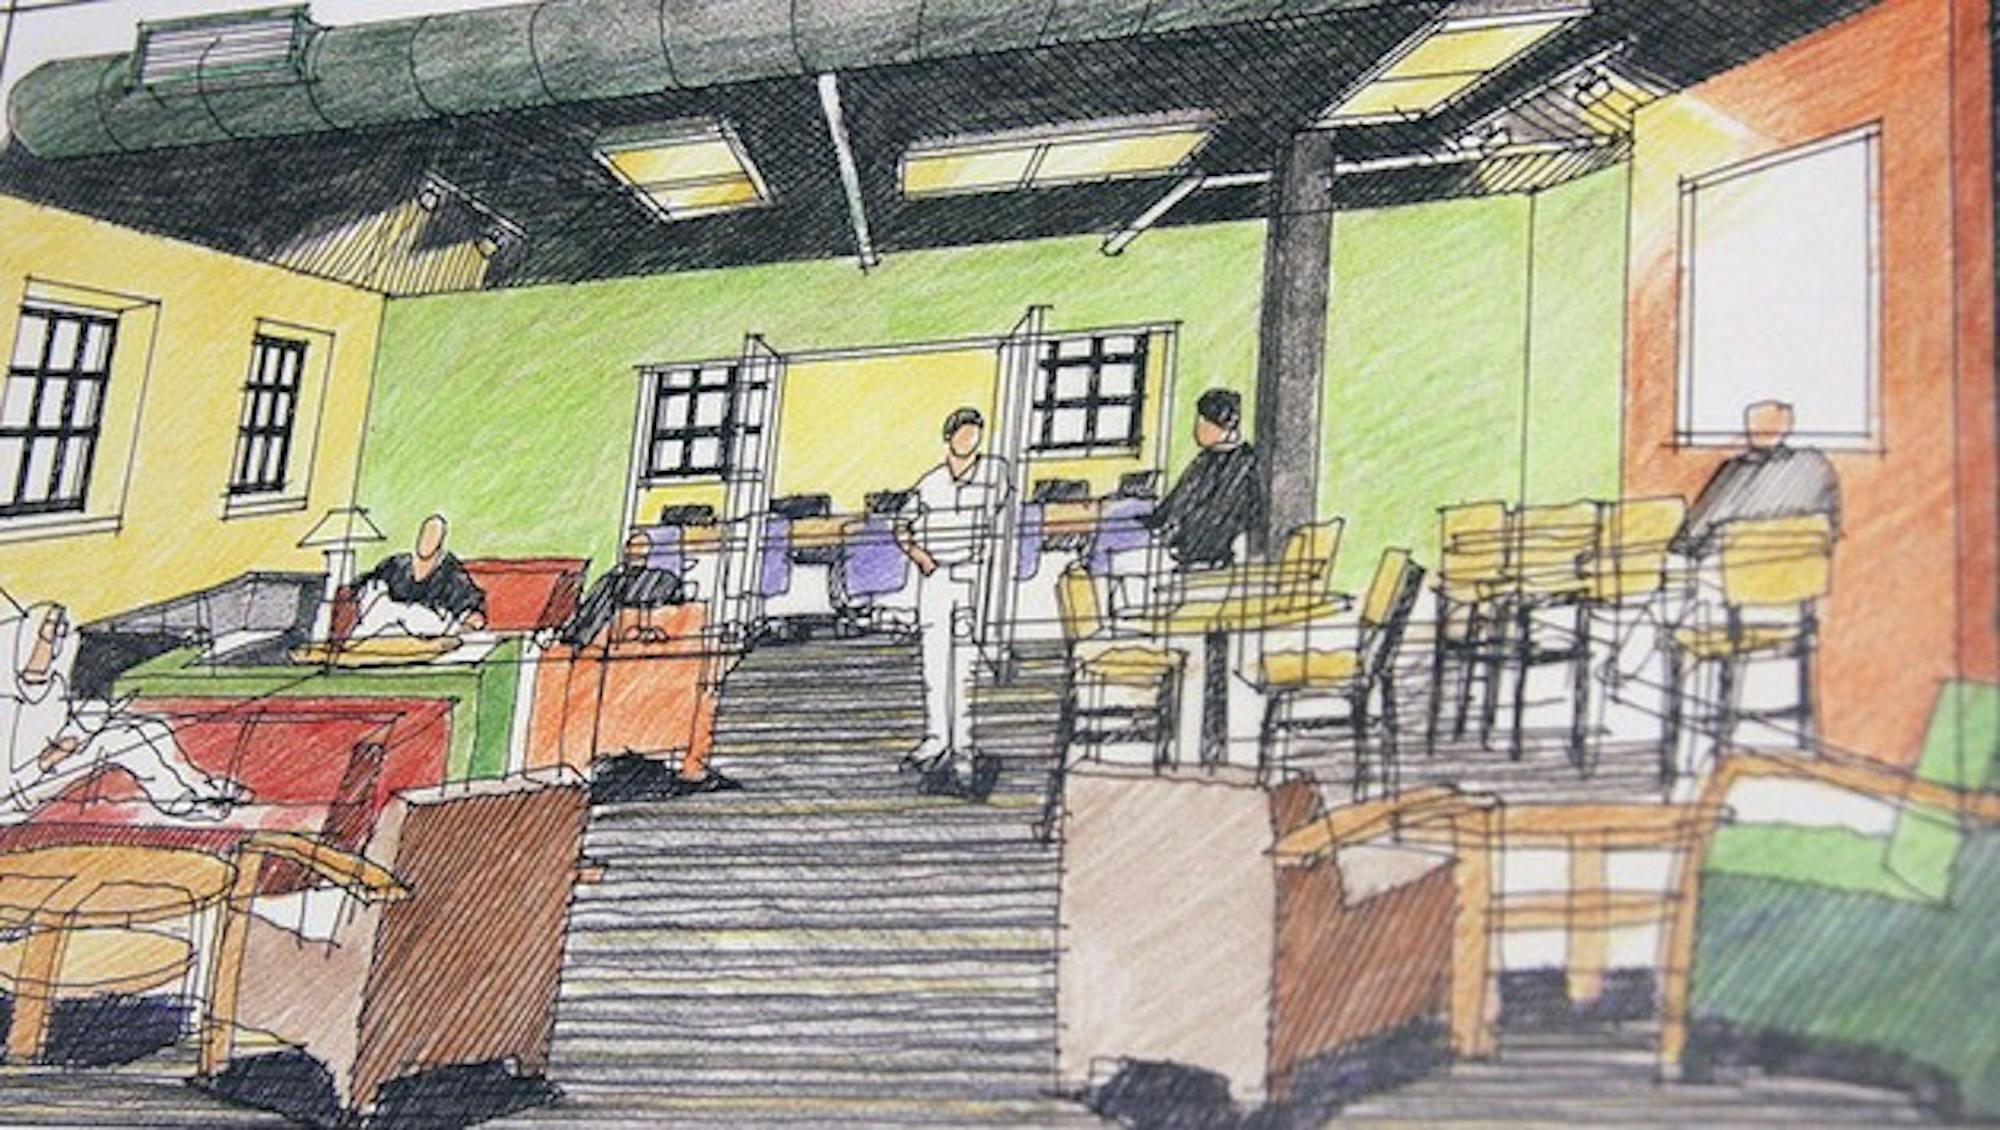 Although originally slated to open in January, new social spaces in the basement of Class of 1953 Commons will open for 2012 Fall term.